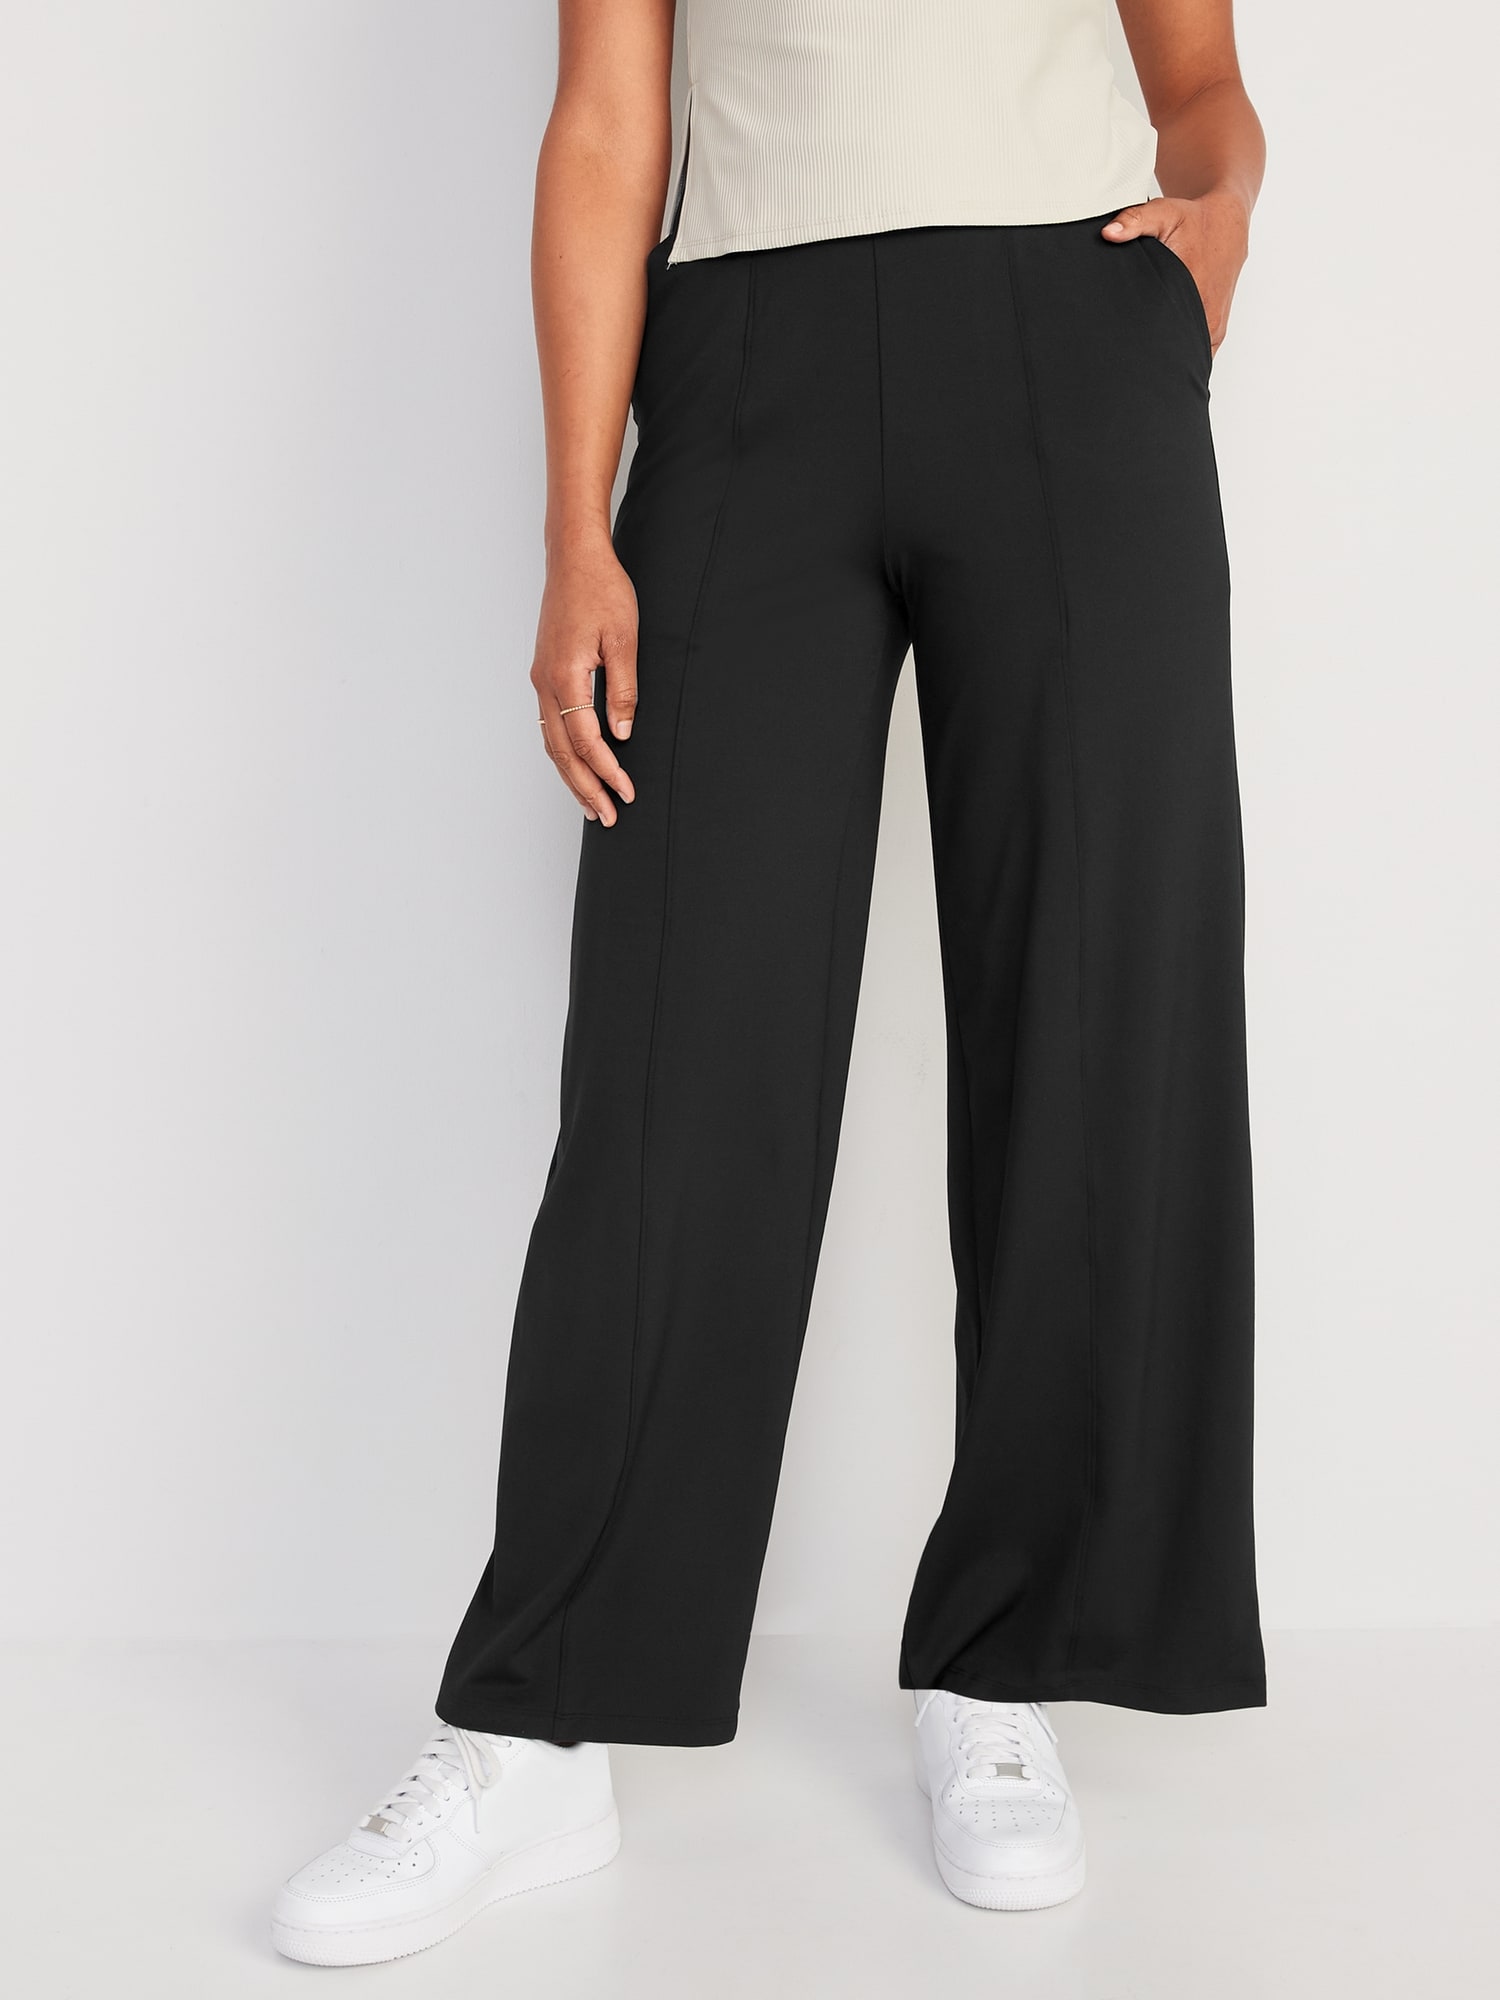 Old Navy High-Waisted PowerSoft Wide-Leg Pants black. 1